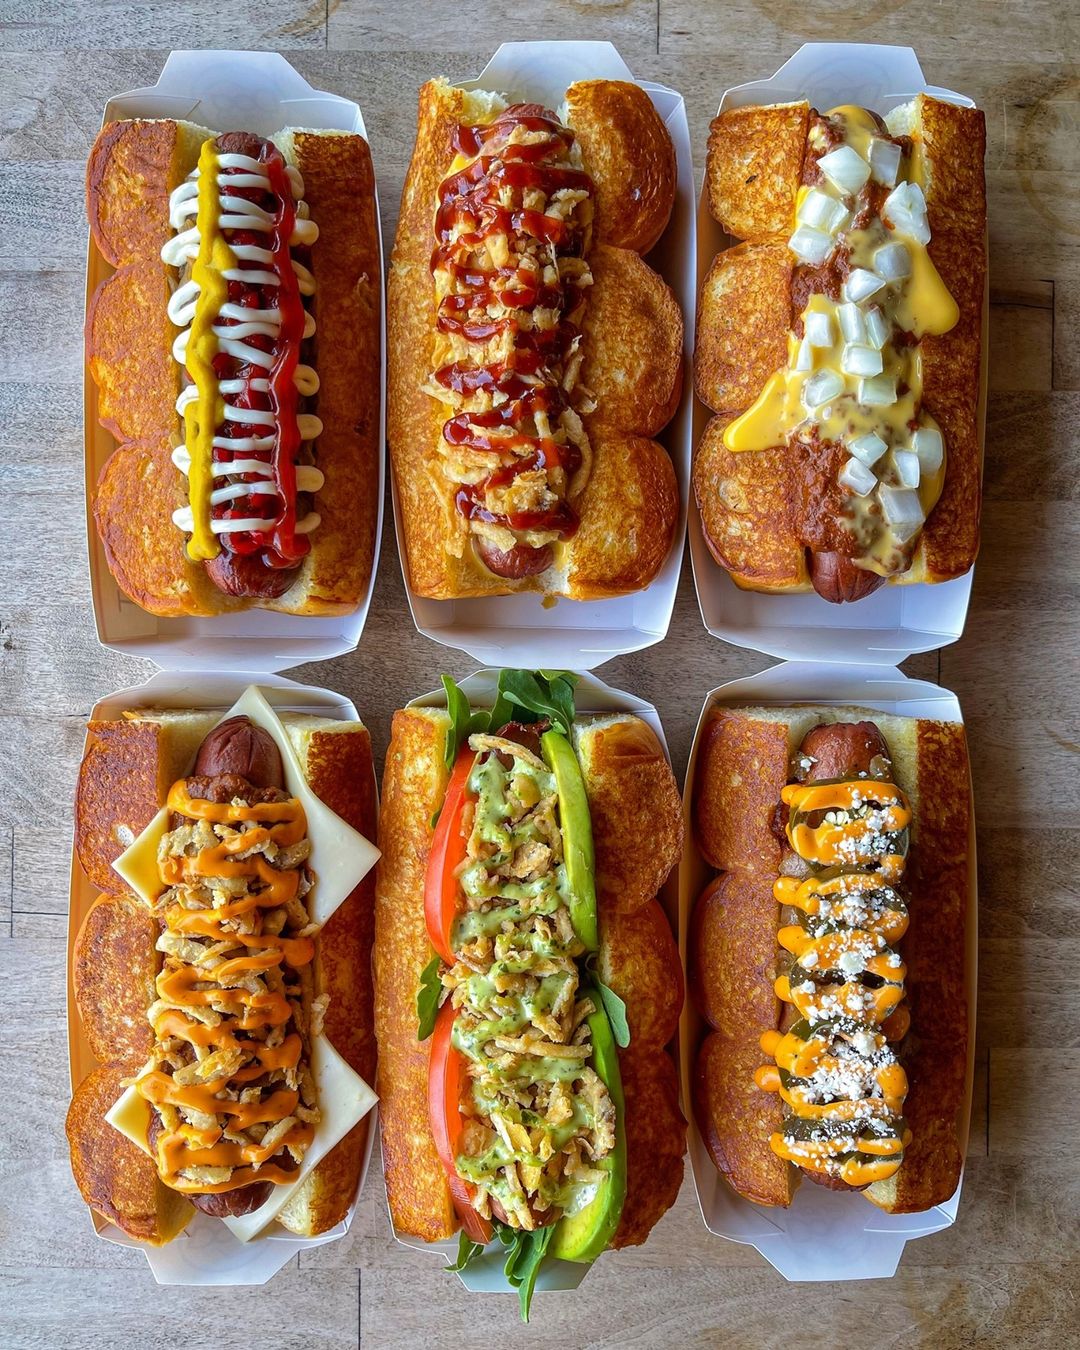 Free Haus Dog at Dog Haus via in-store or App Today 7-21-21